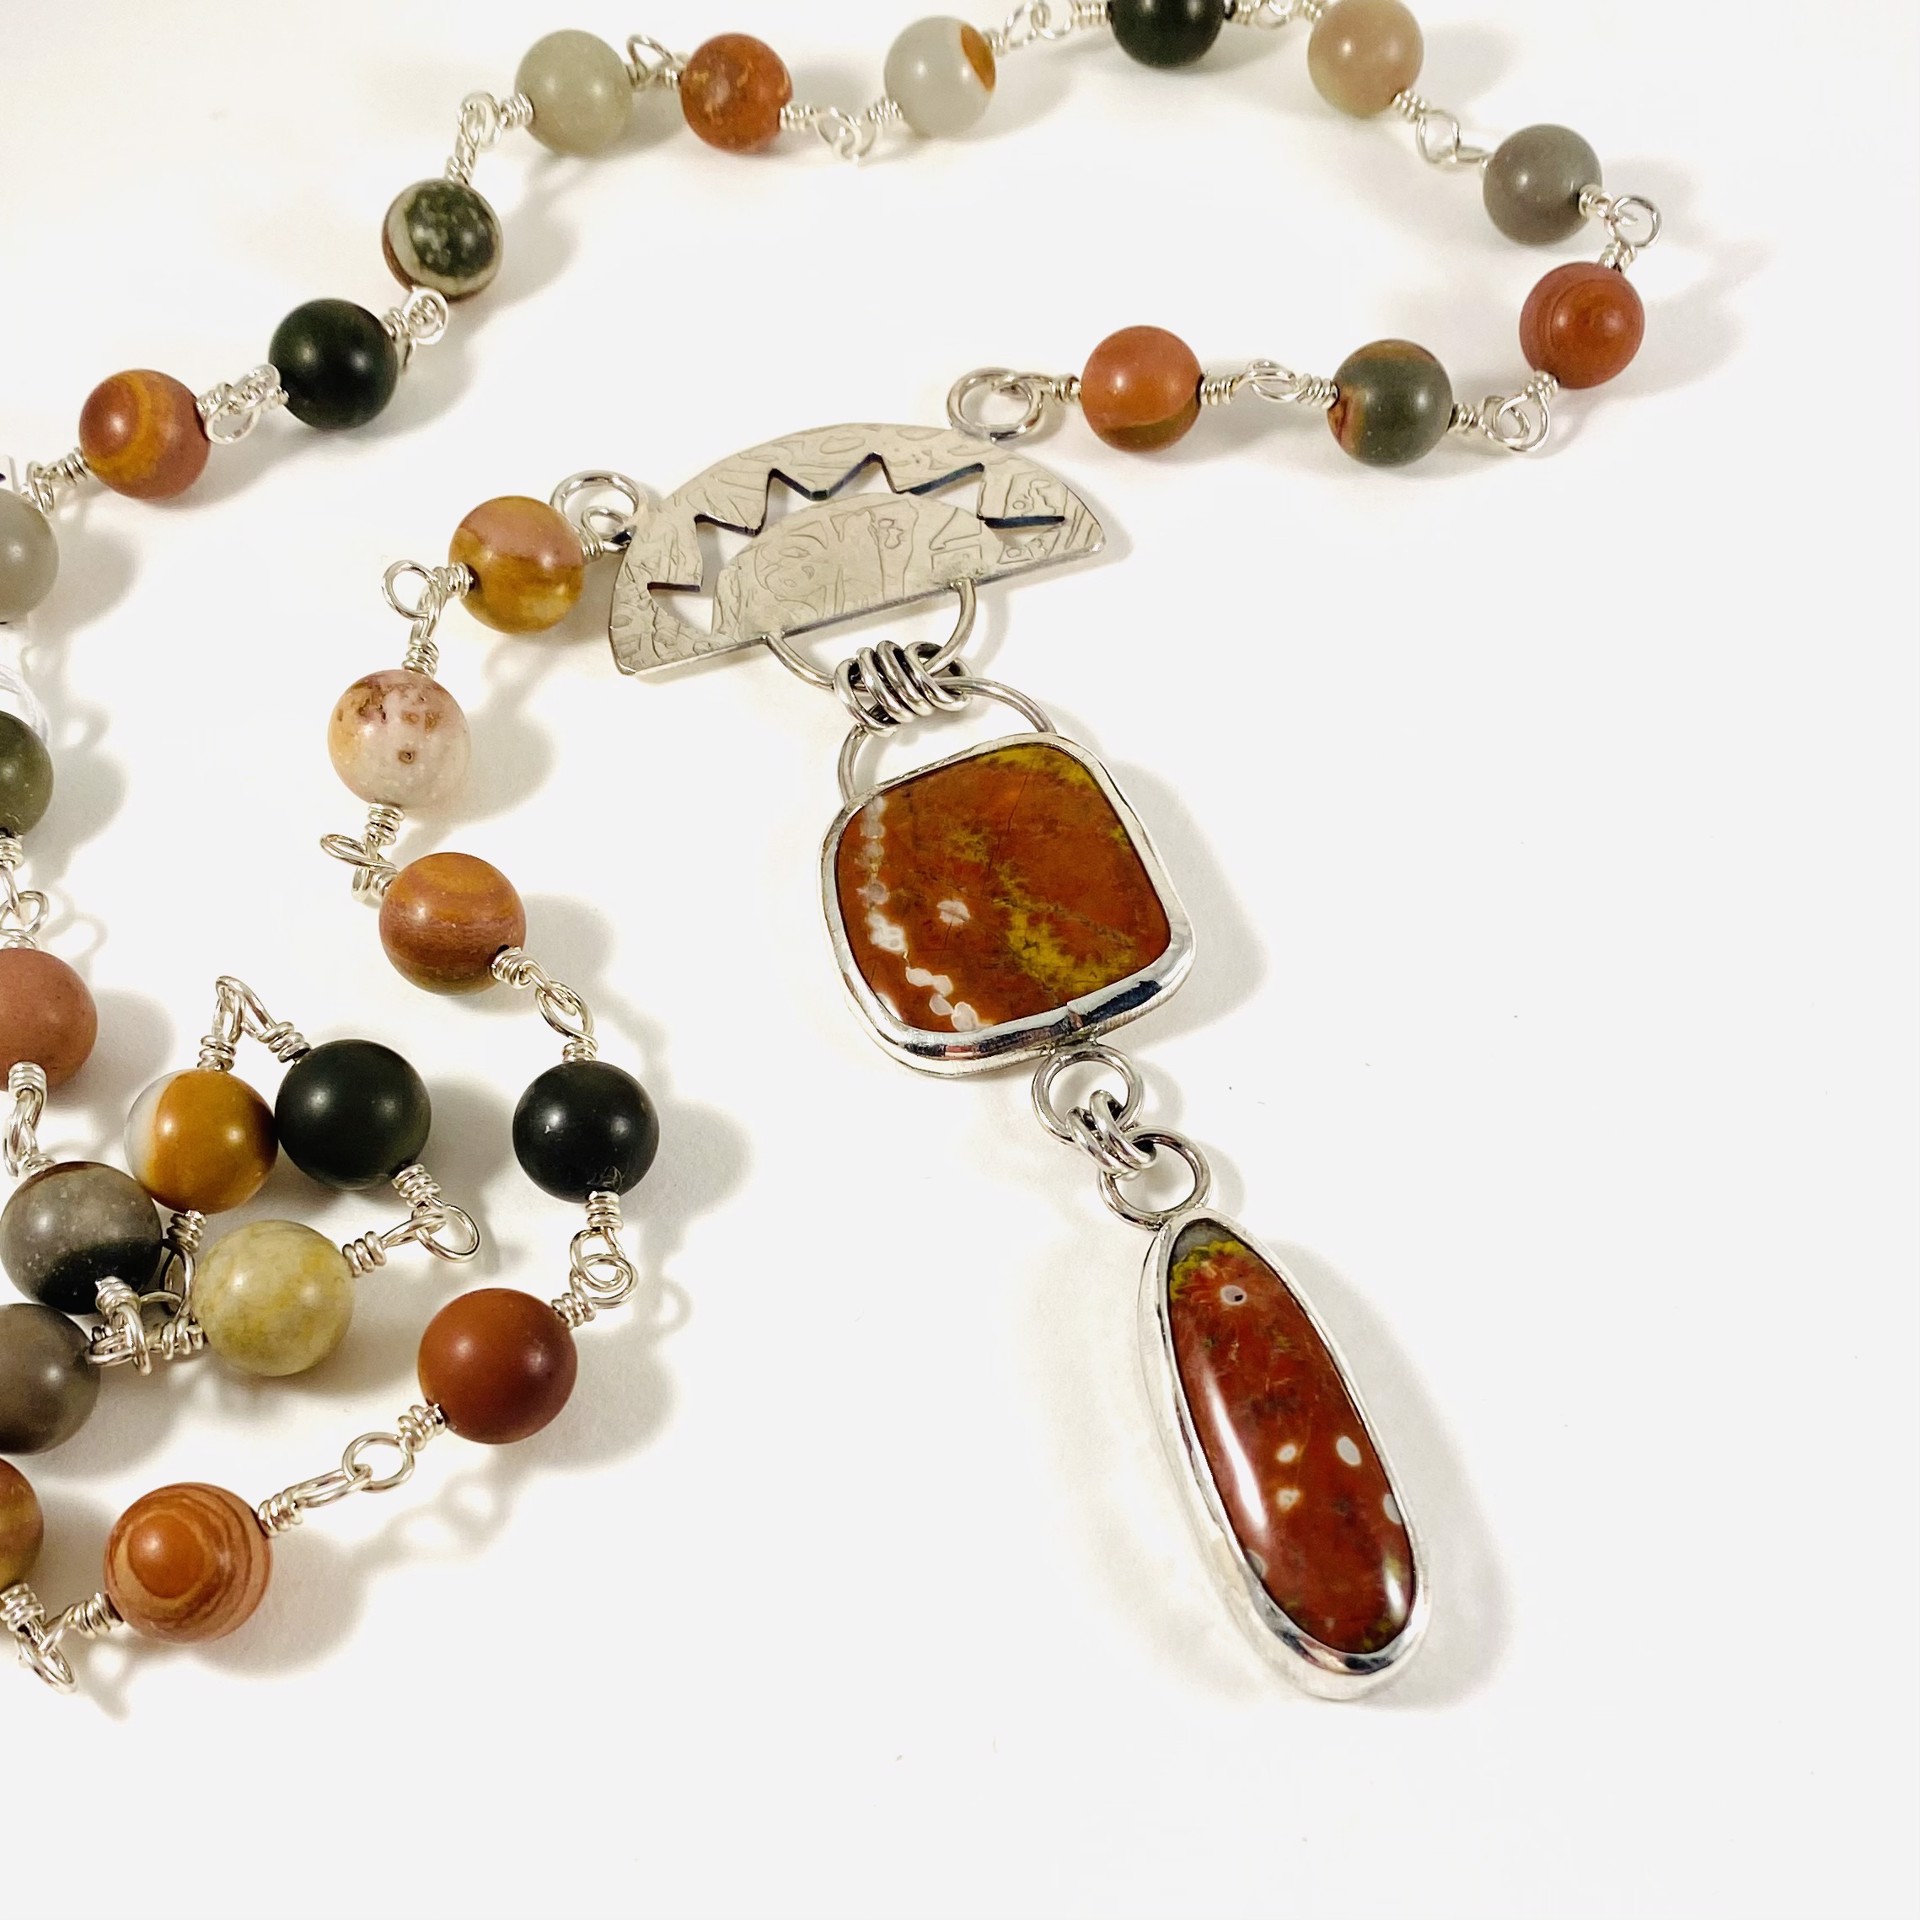 California Poppy Jasper and Sterling (4.5")Pendant on 23" Jasper Bead Chain Necklace AB21-25 by Anne Bivens